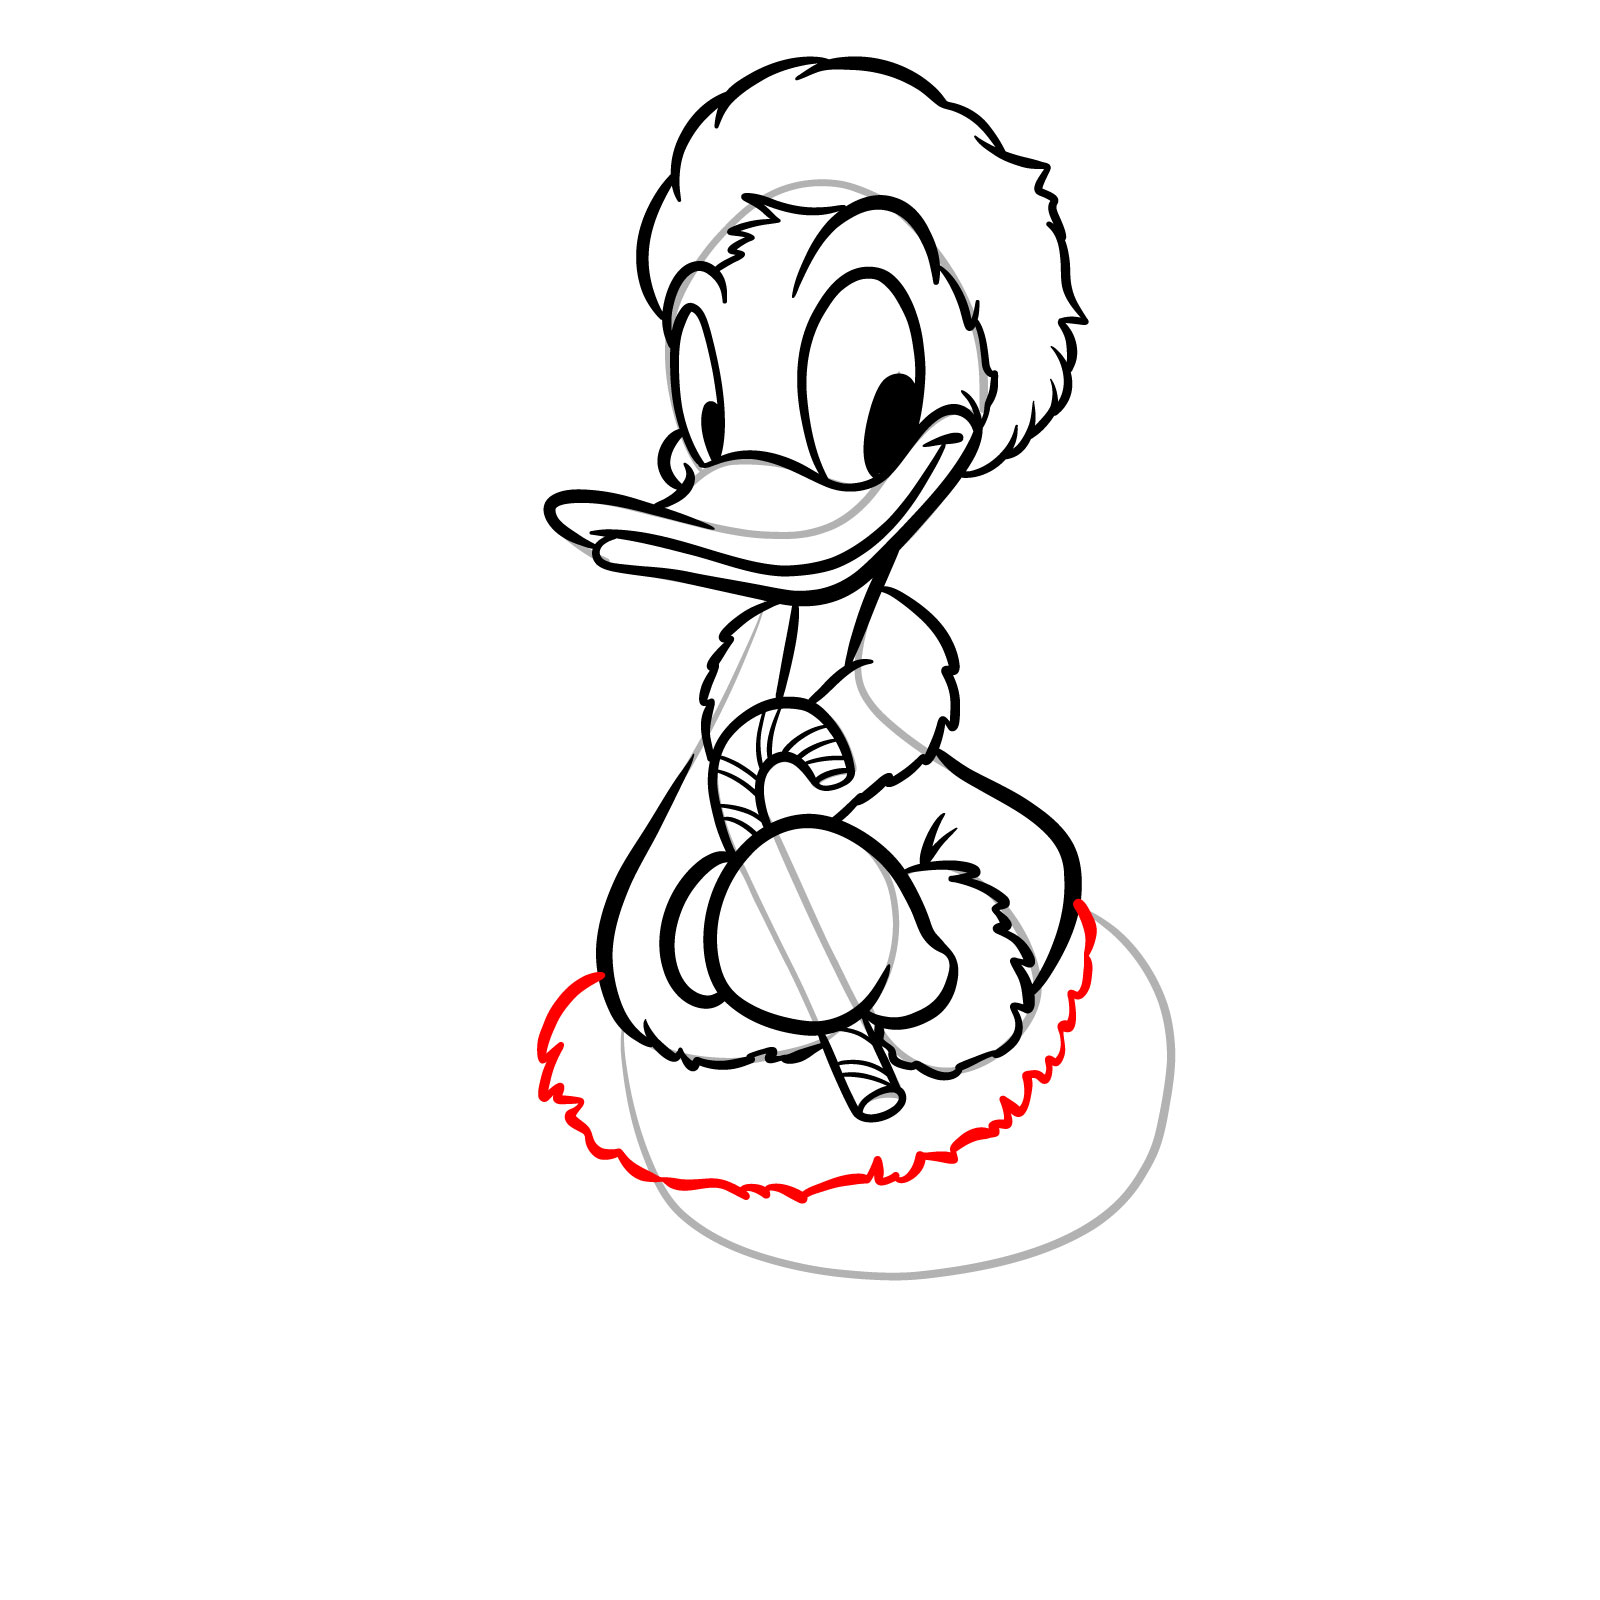 How to Draw Christmas Donald Duck - step 17